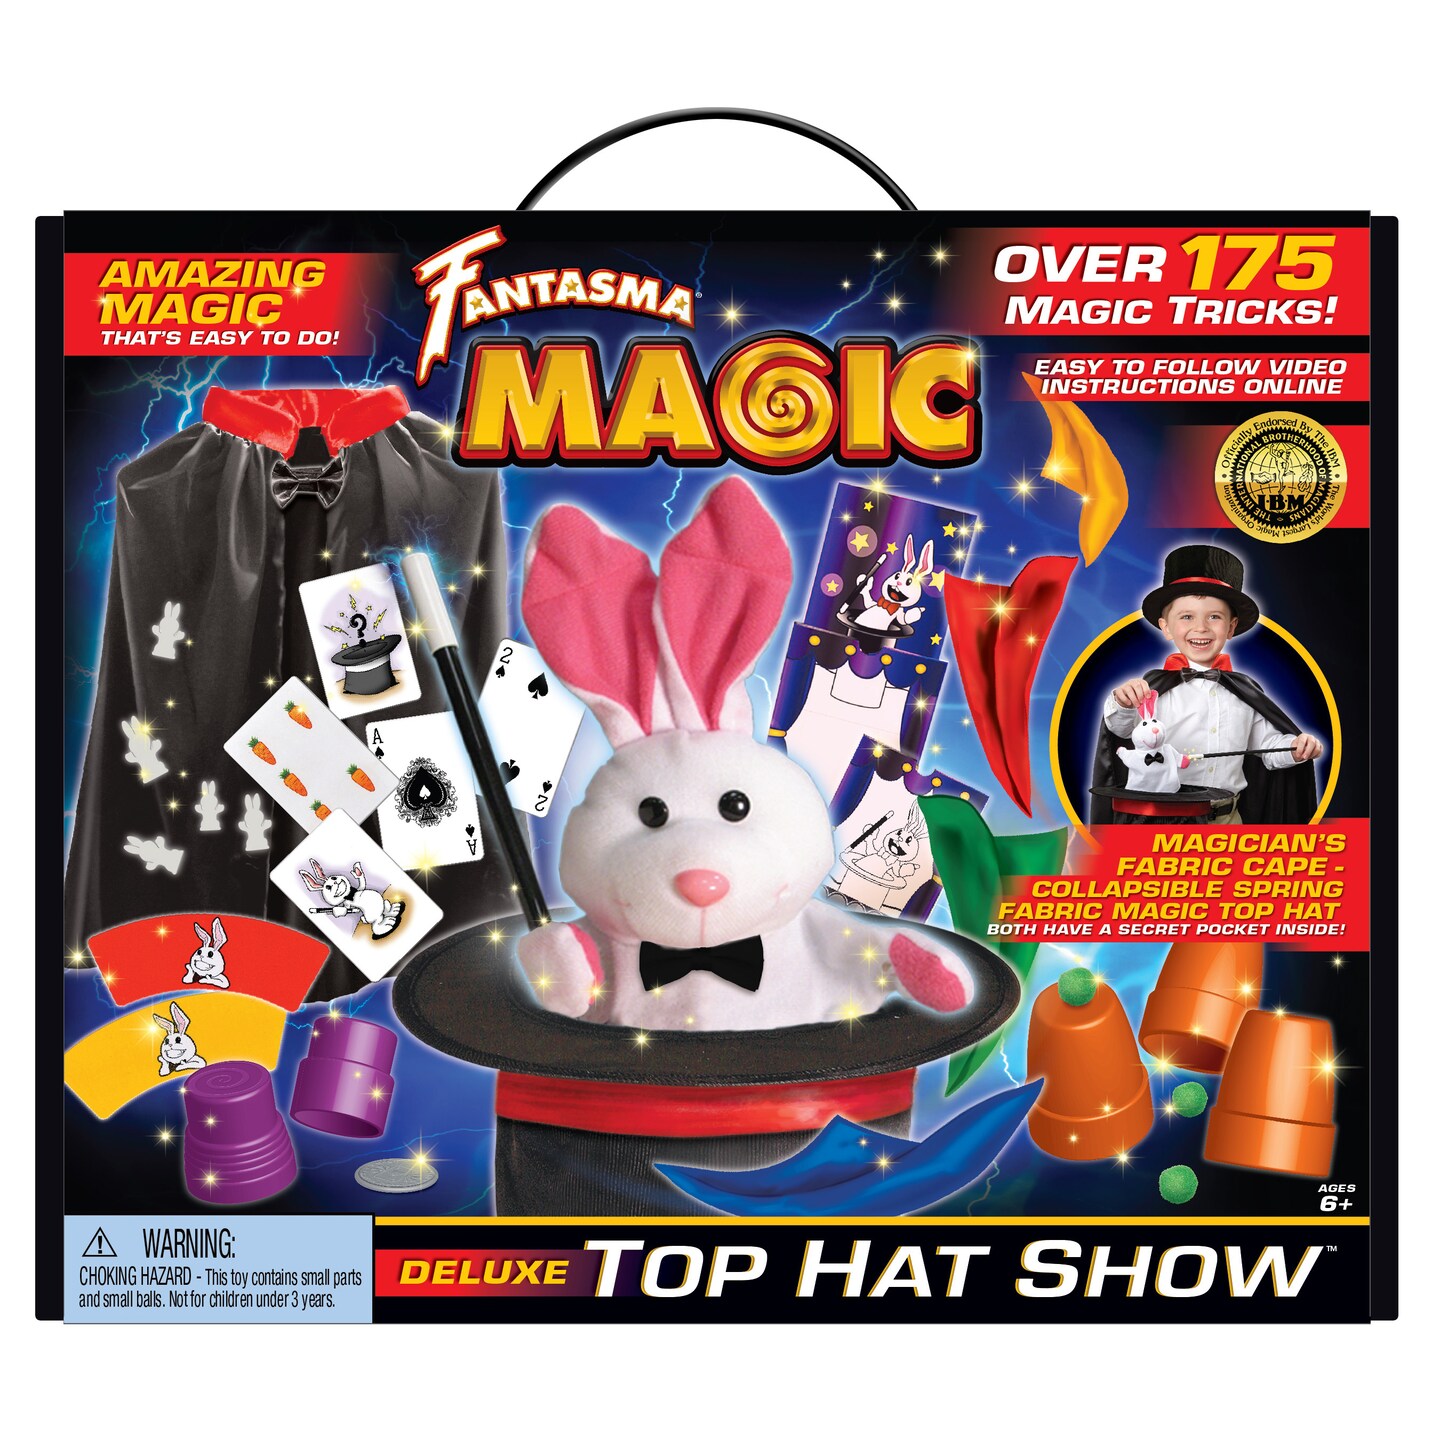 DELUXE TOP HAT SHOW BY FANTASMA